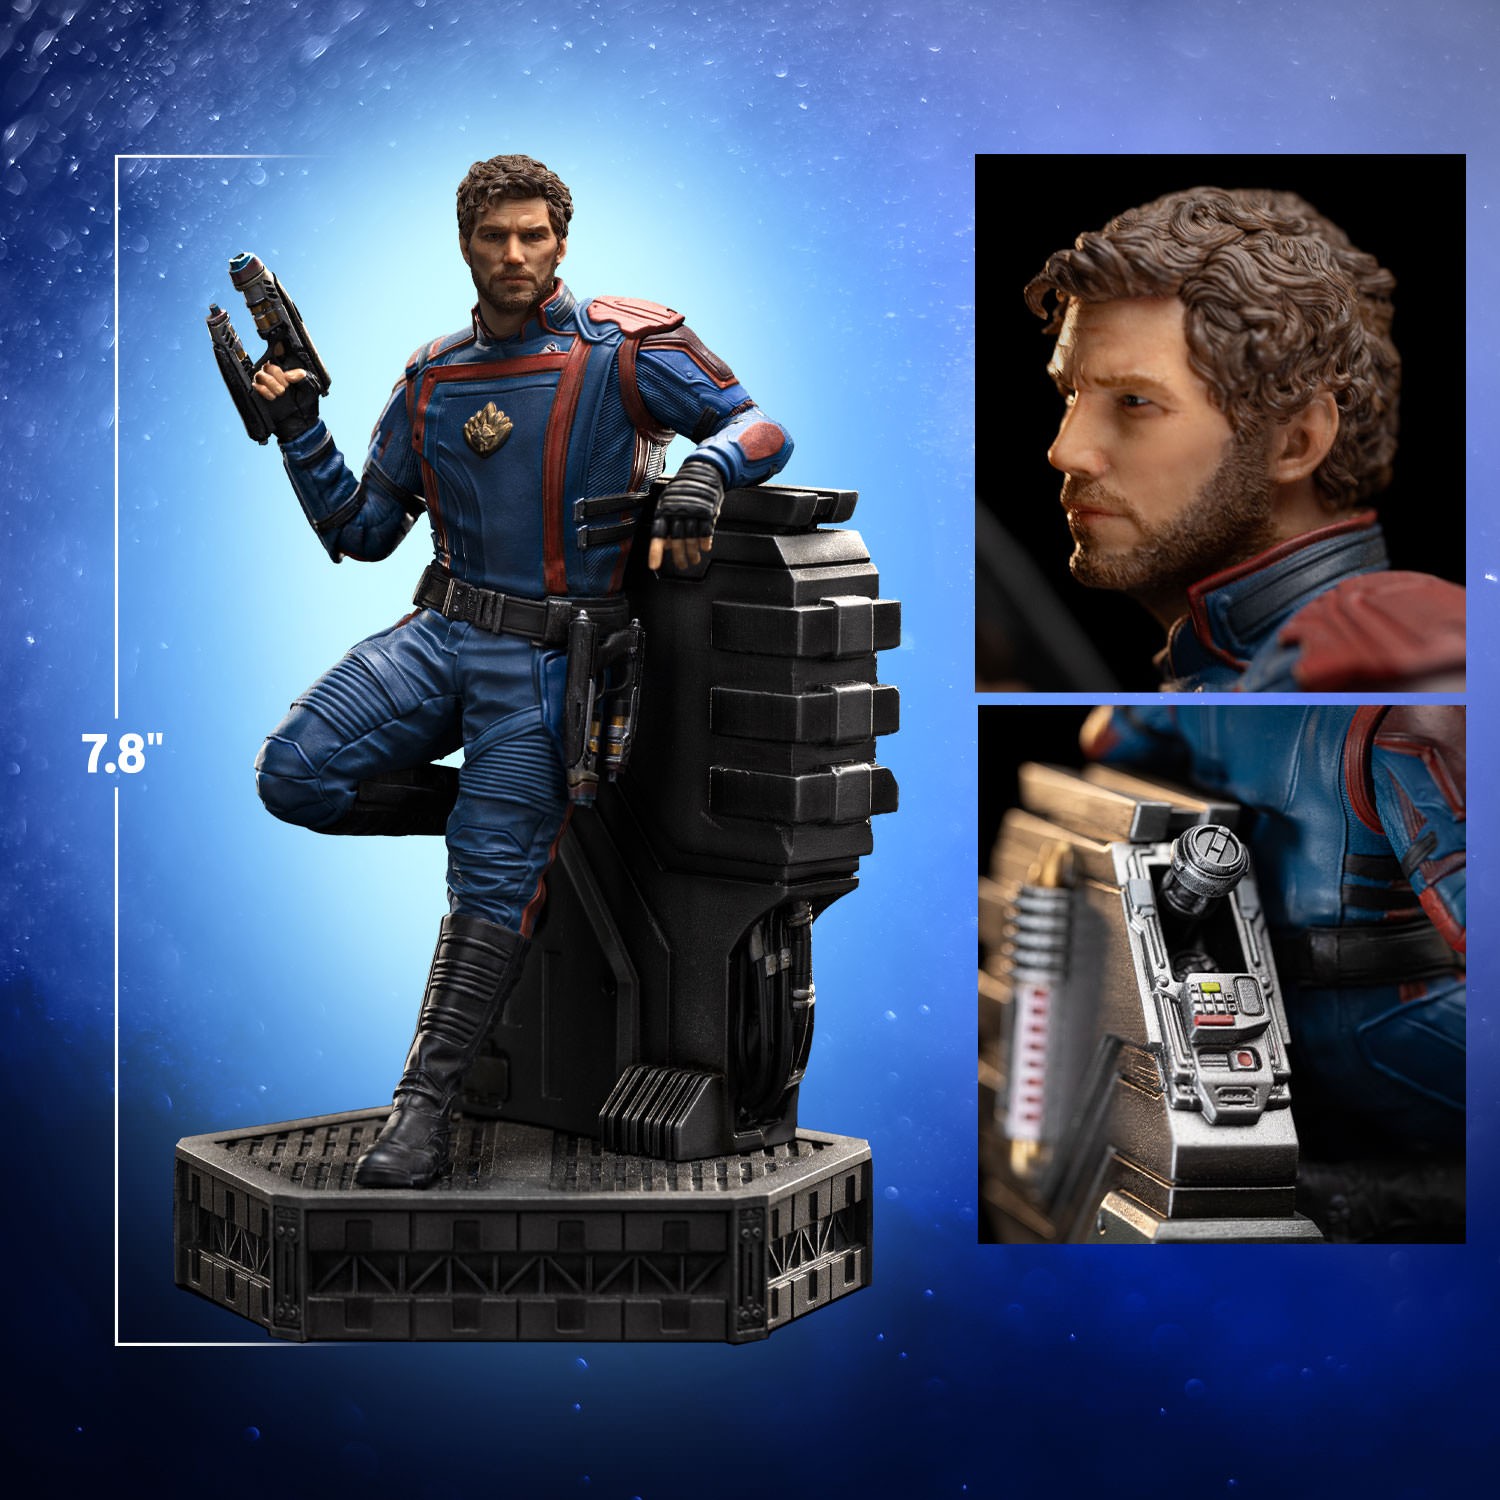 Statue Star-Lord - Art Scale - 1/10 - Avengers: Endgame - Iron Studios -  Iron Studios Official Store - Action figures, Collectibles &Toys